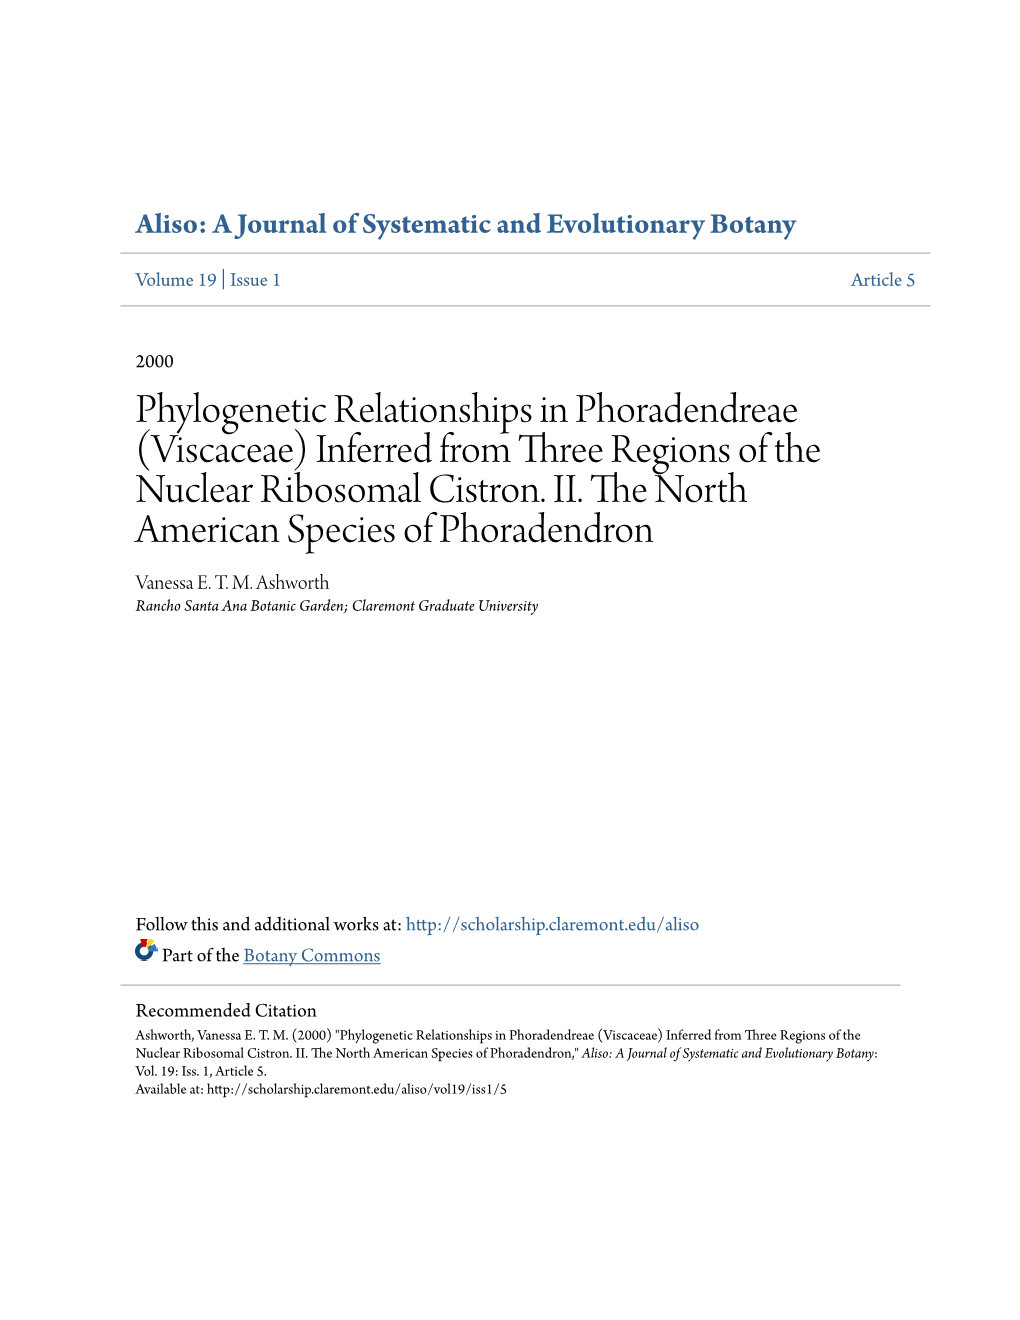 Phylogenetic Relationships in Phoradendreae (Viscaceae) Inferred from Three Regions of the Nuclear Ribosomal Cistron